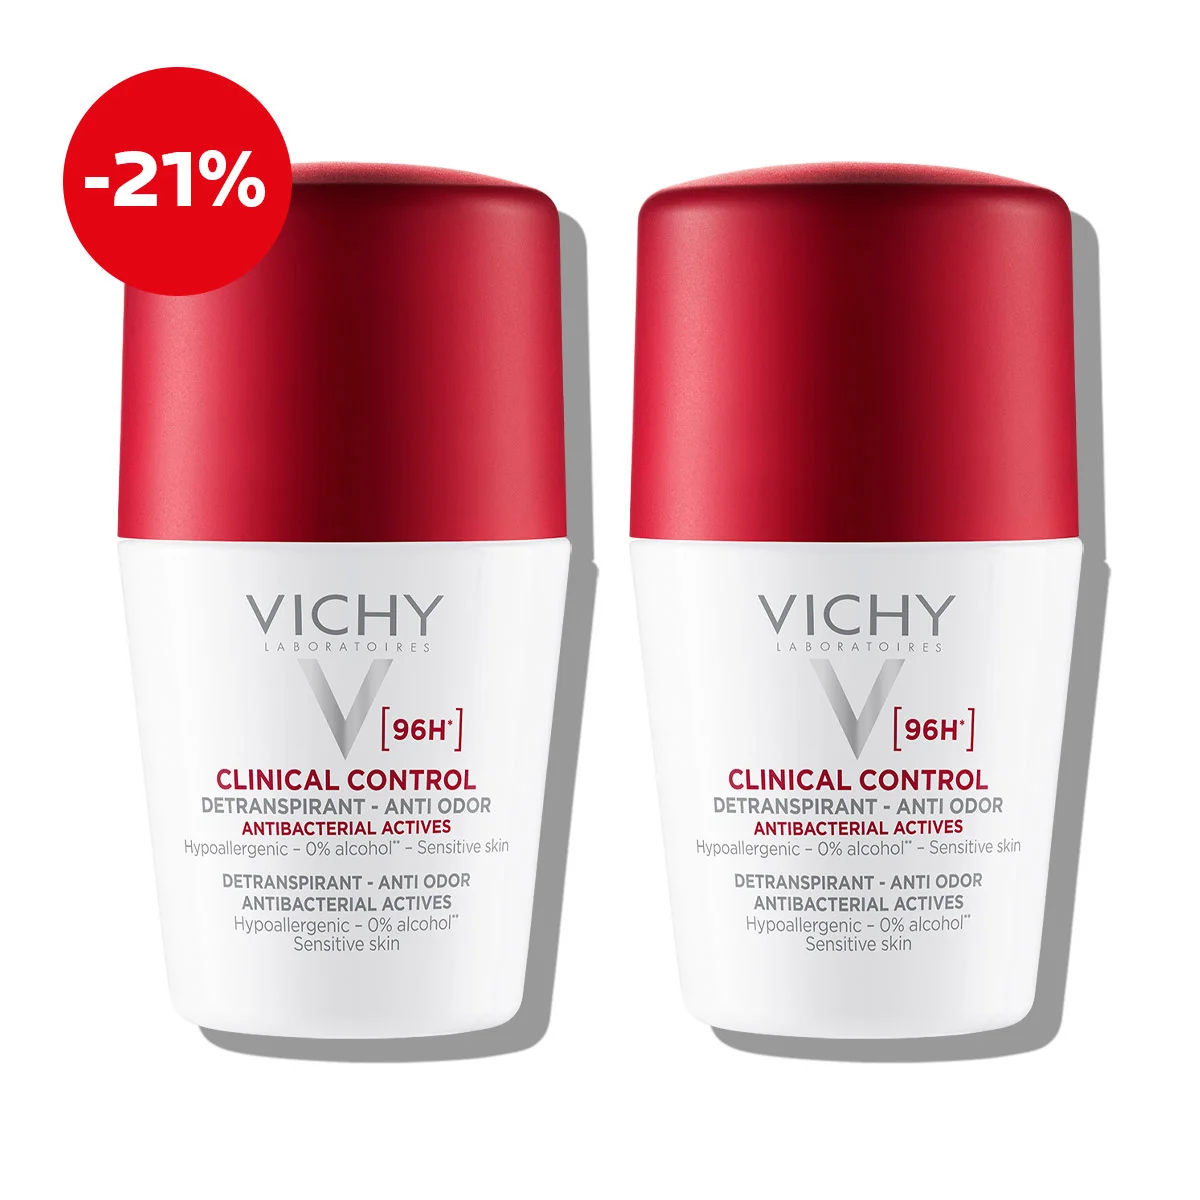 Vichy Deo-Duo pack; Clinical Control roll-on tested to control excessive sweat up to 96h (1) (1) (1)